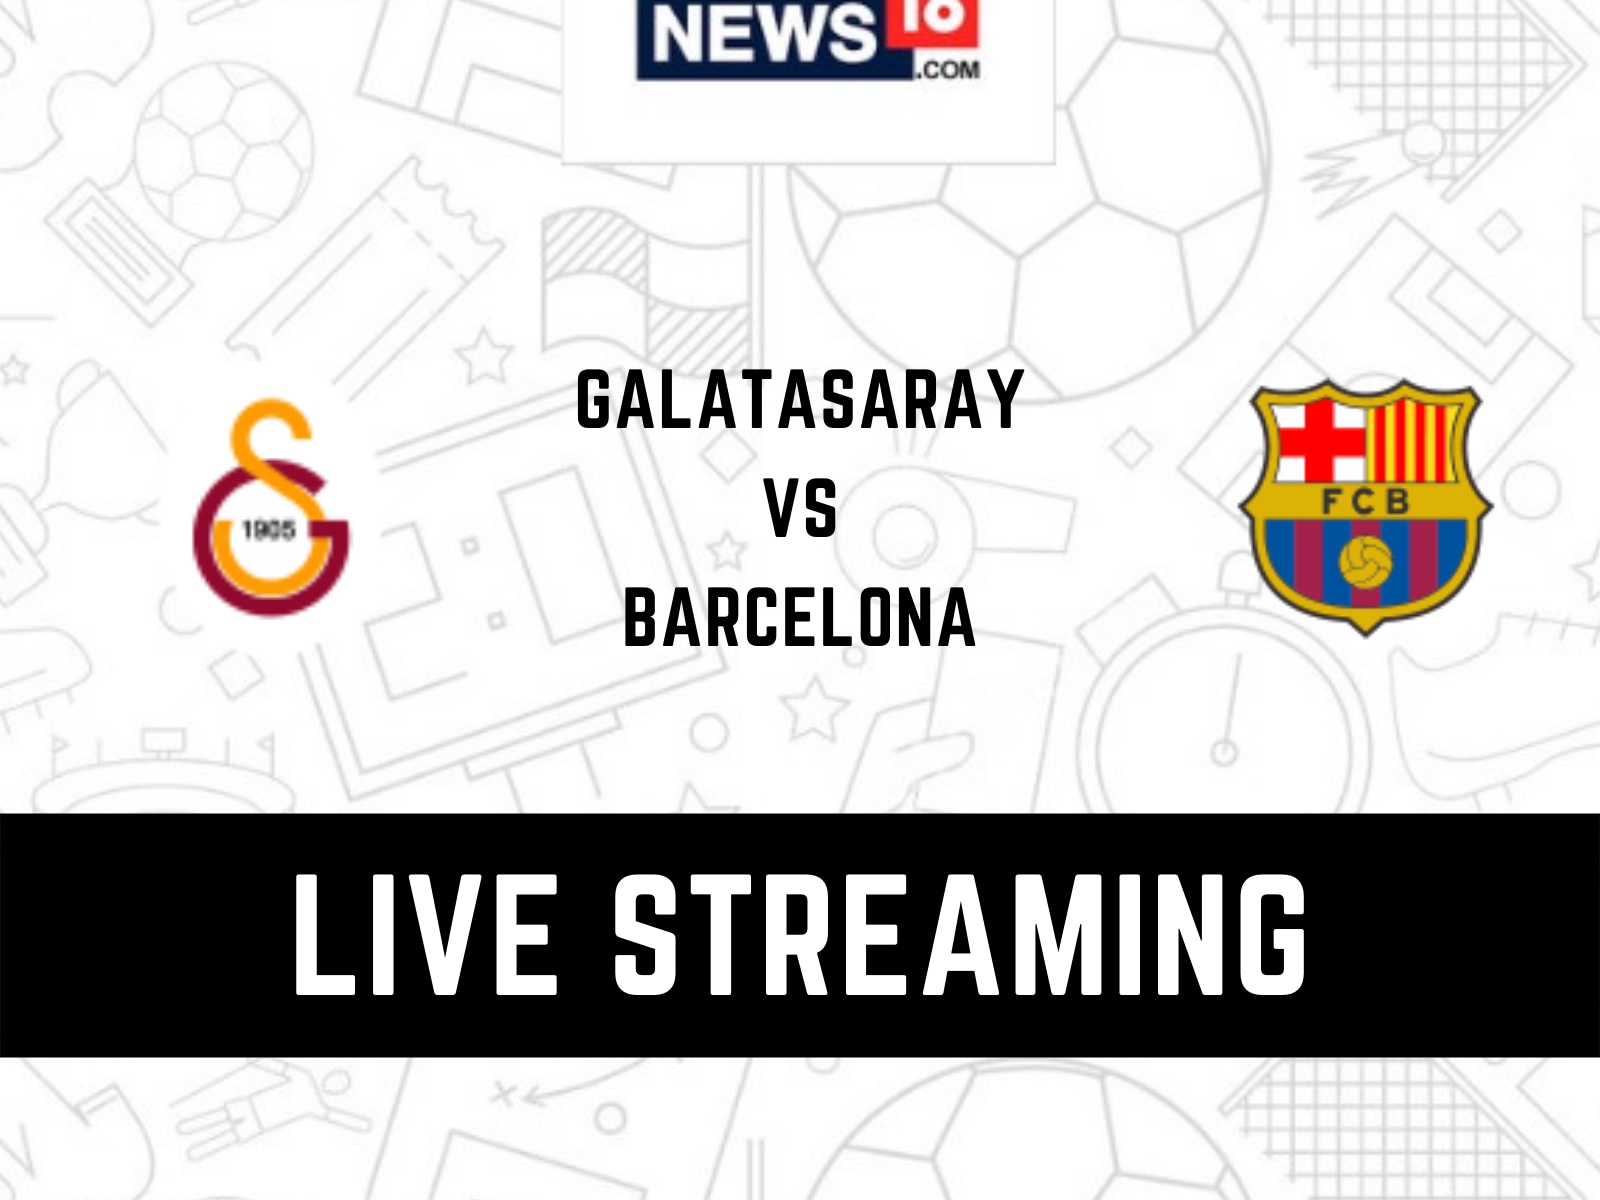 UEFA Europa League 2021-22 Galatasaray vs Barcelona LIVE Streaming When and Where to Watch Online, TV Telecast, Team News